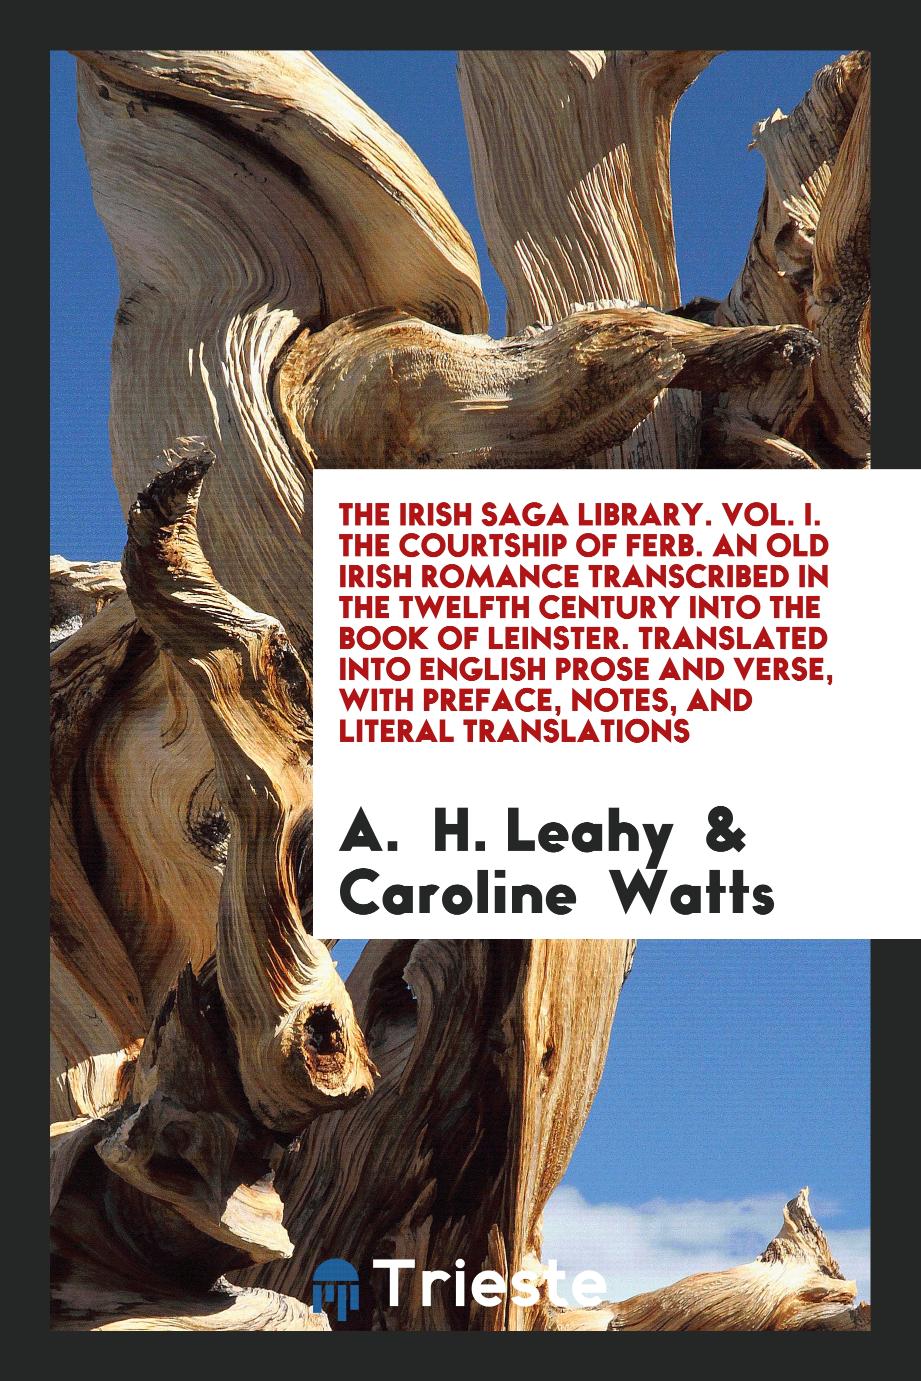 The Irish Saga Library. Vol. I. The Courtship of Ferb. An Old Irish Romance Transcribed in the Twelfth Century into the Book of Leinster. Translated into English Prose and Verse, with Preface, Notes, and Literal Translations